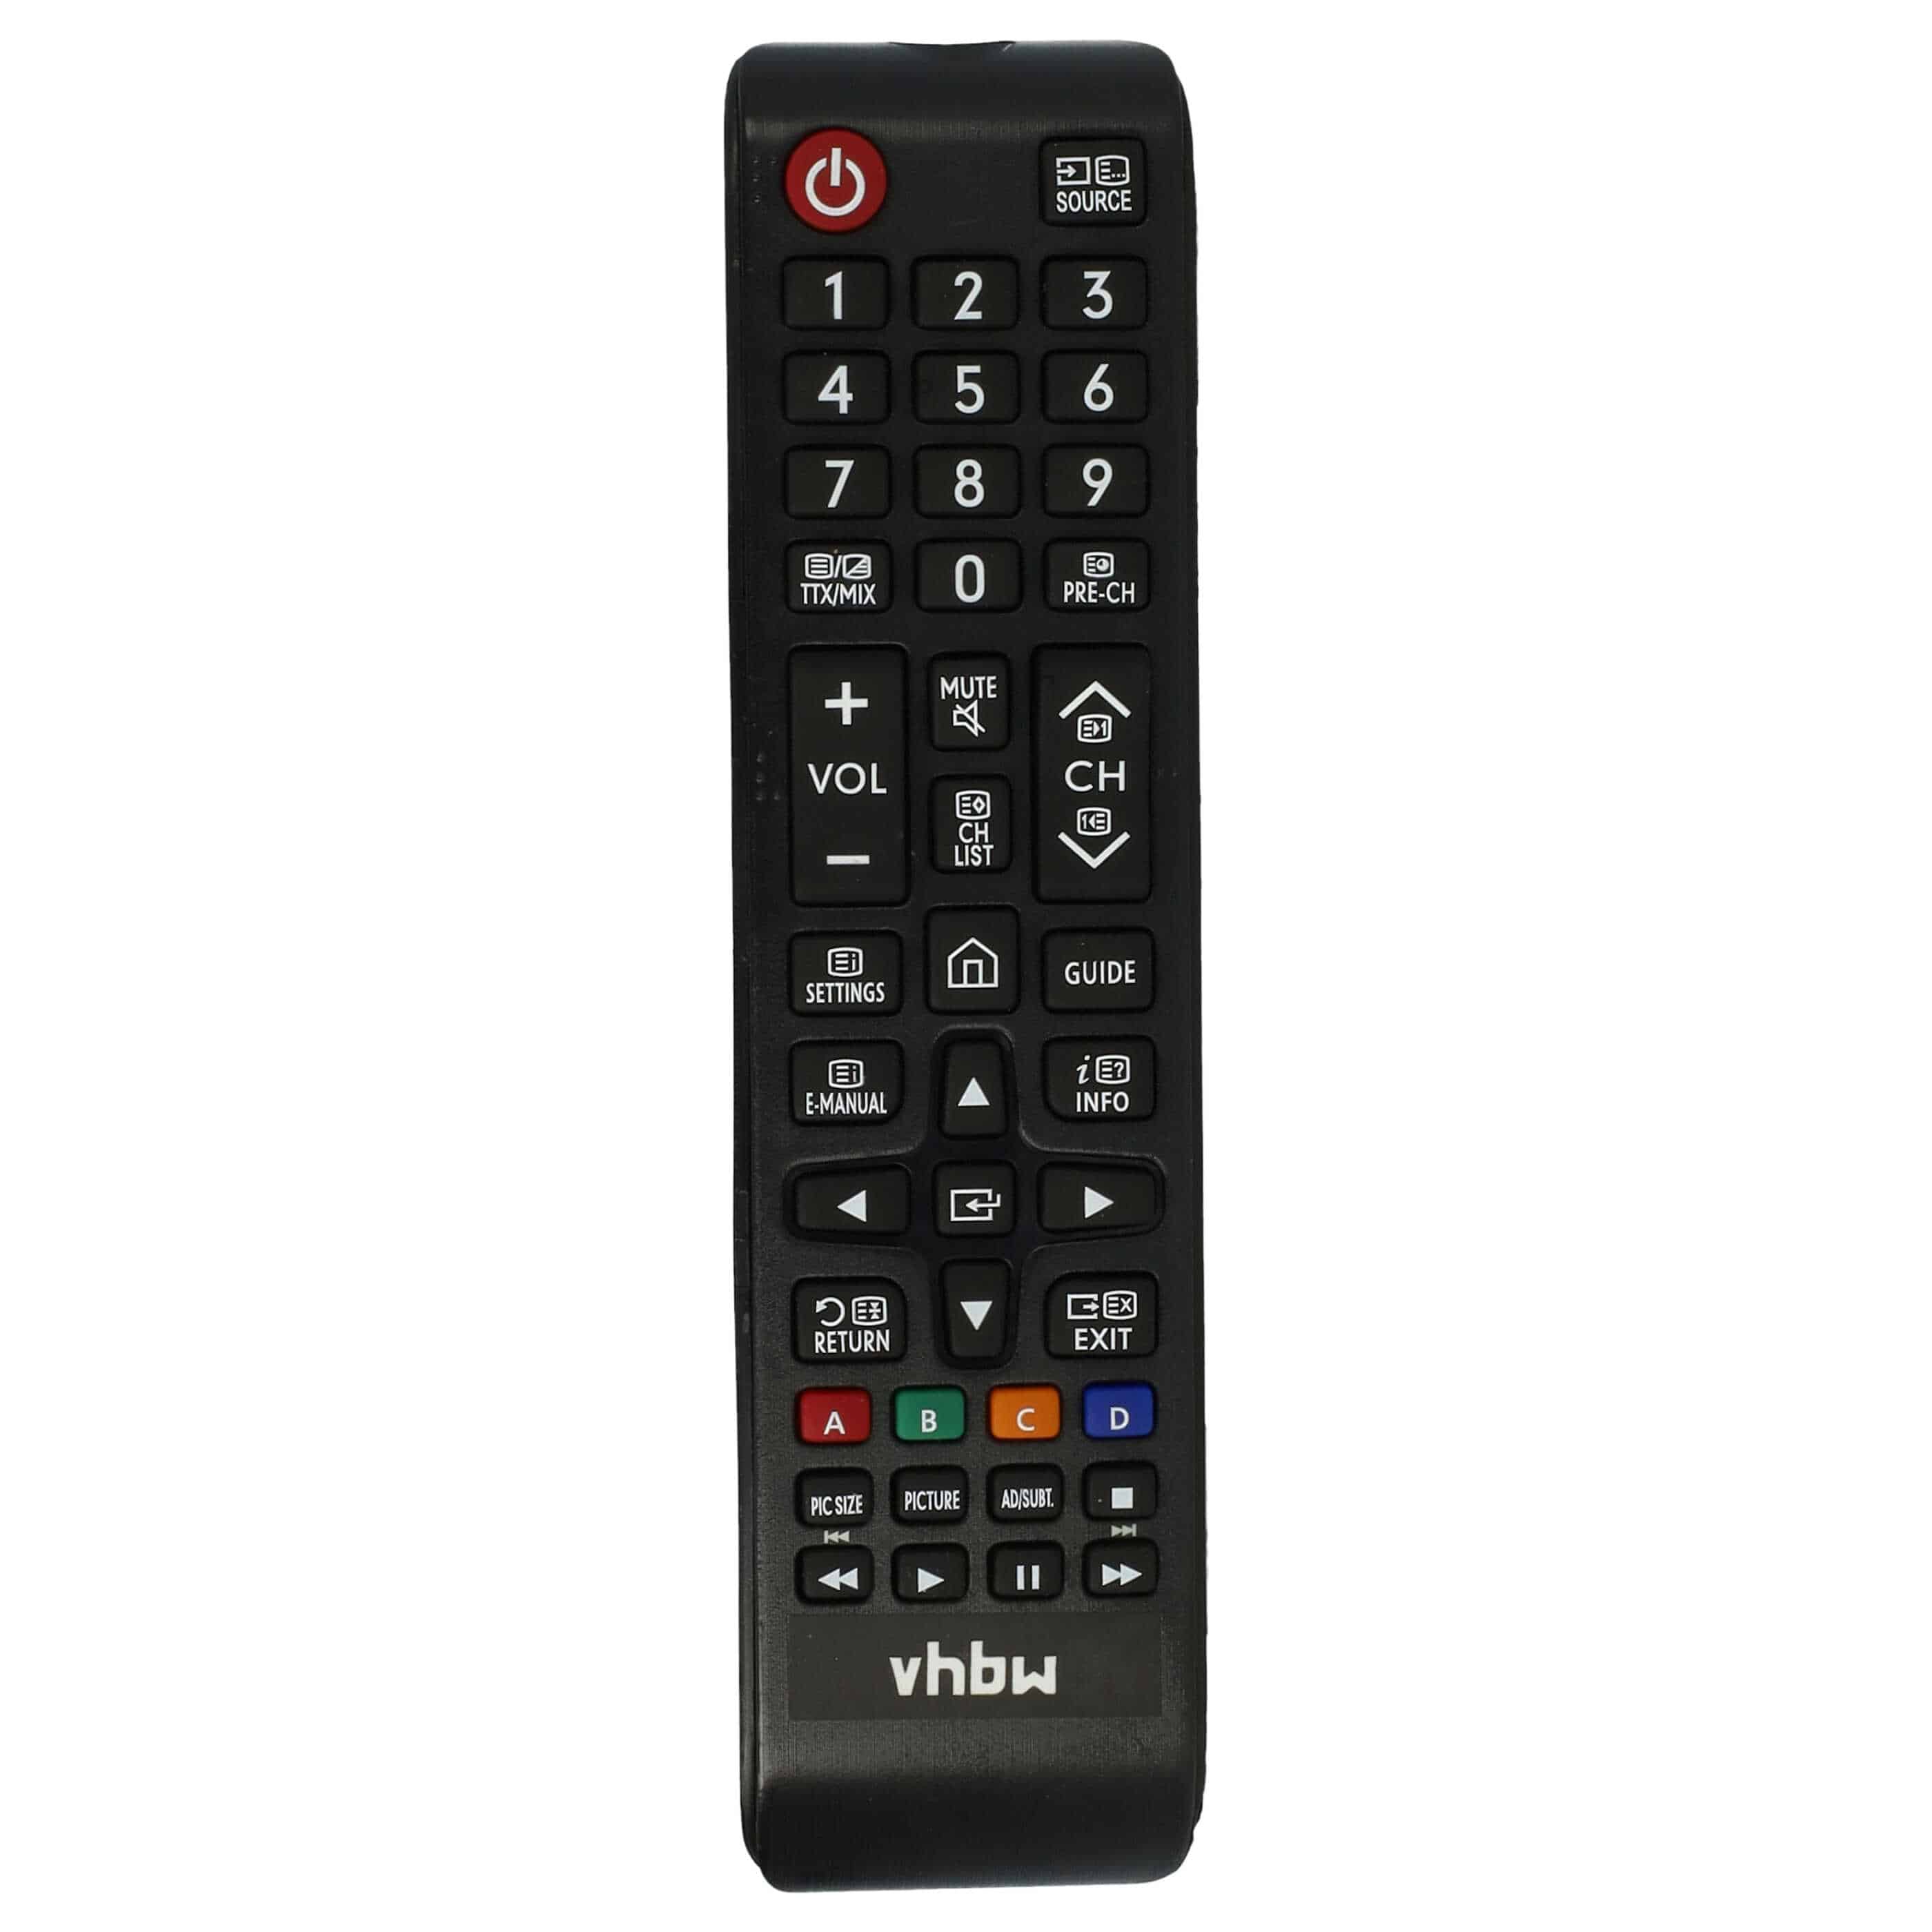 Remote Control replaces Samsung BN59-01303A for Samsung TV